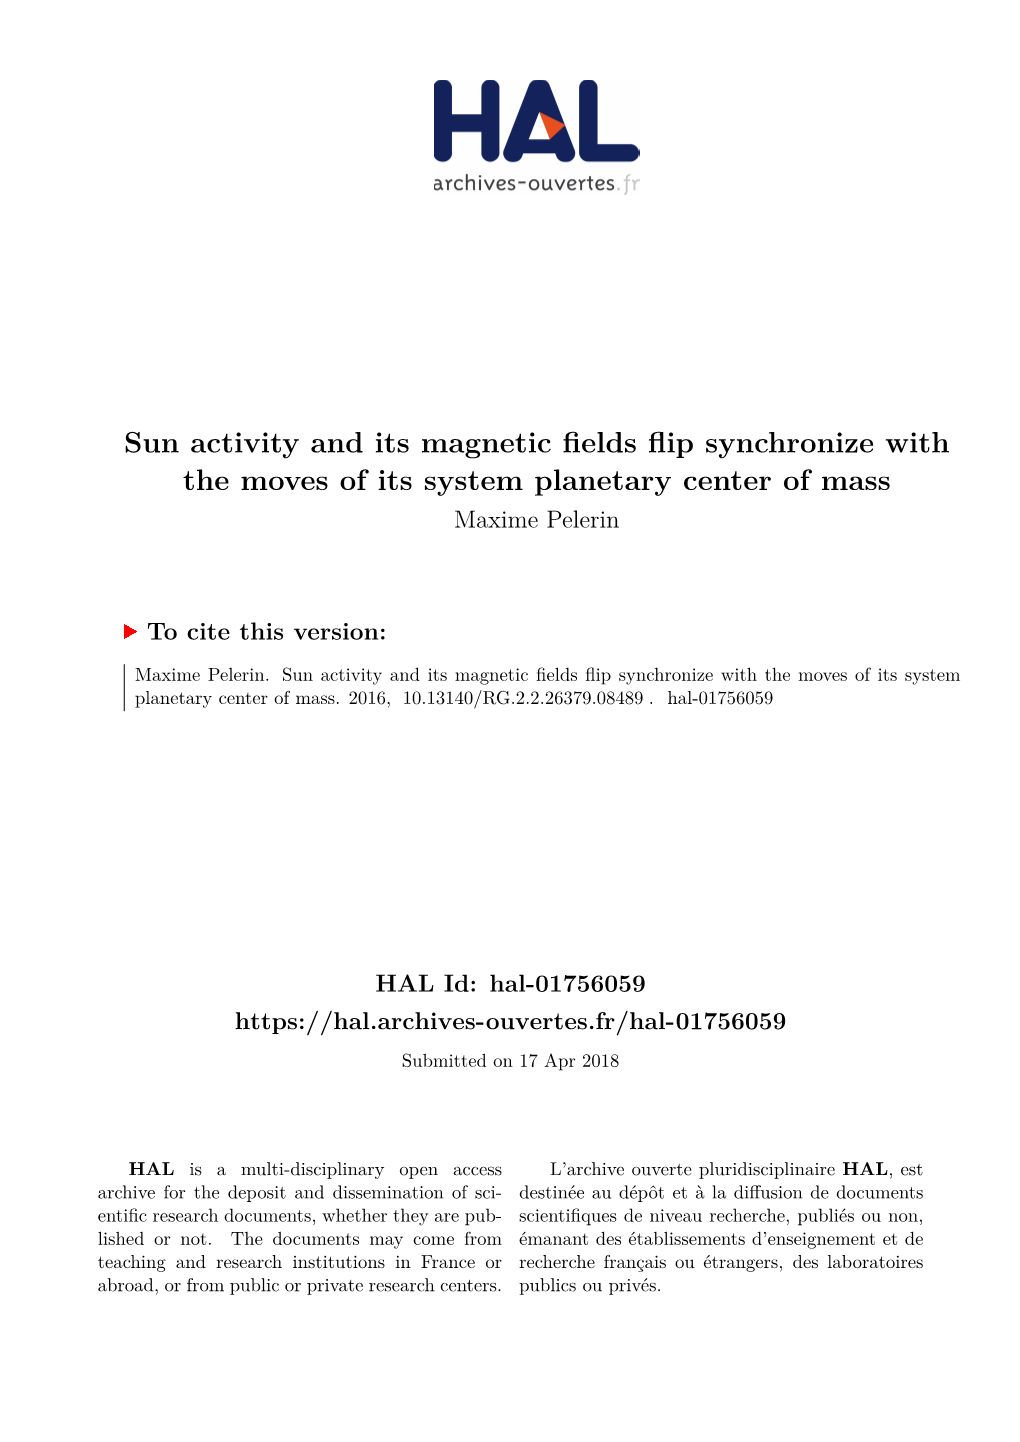 Sun Activity and Its Magnetic Fields Flip Synchronize with the Moves of Its System Planetary Center of Mass Maxime Pelerin